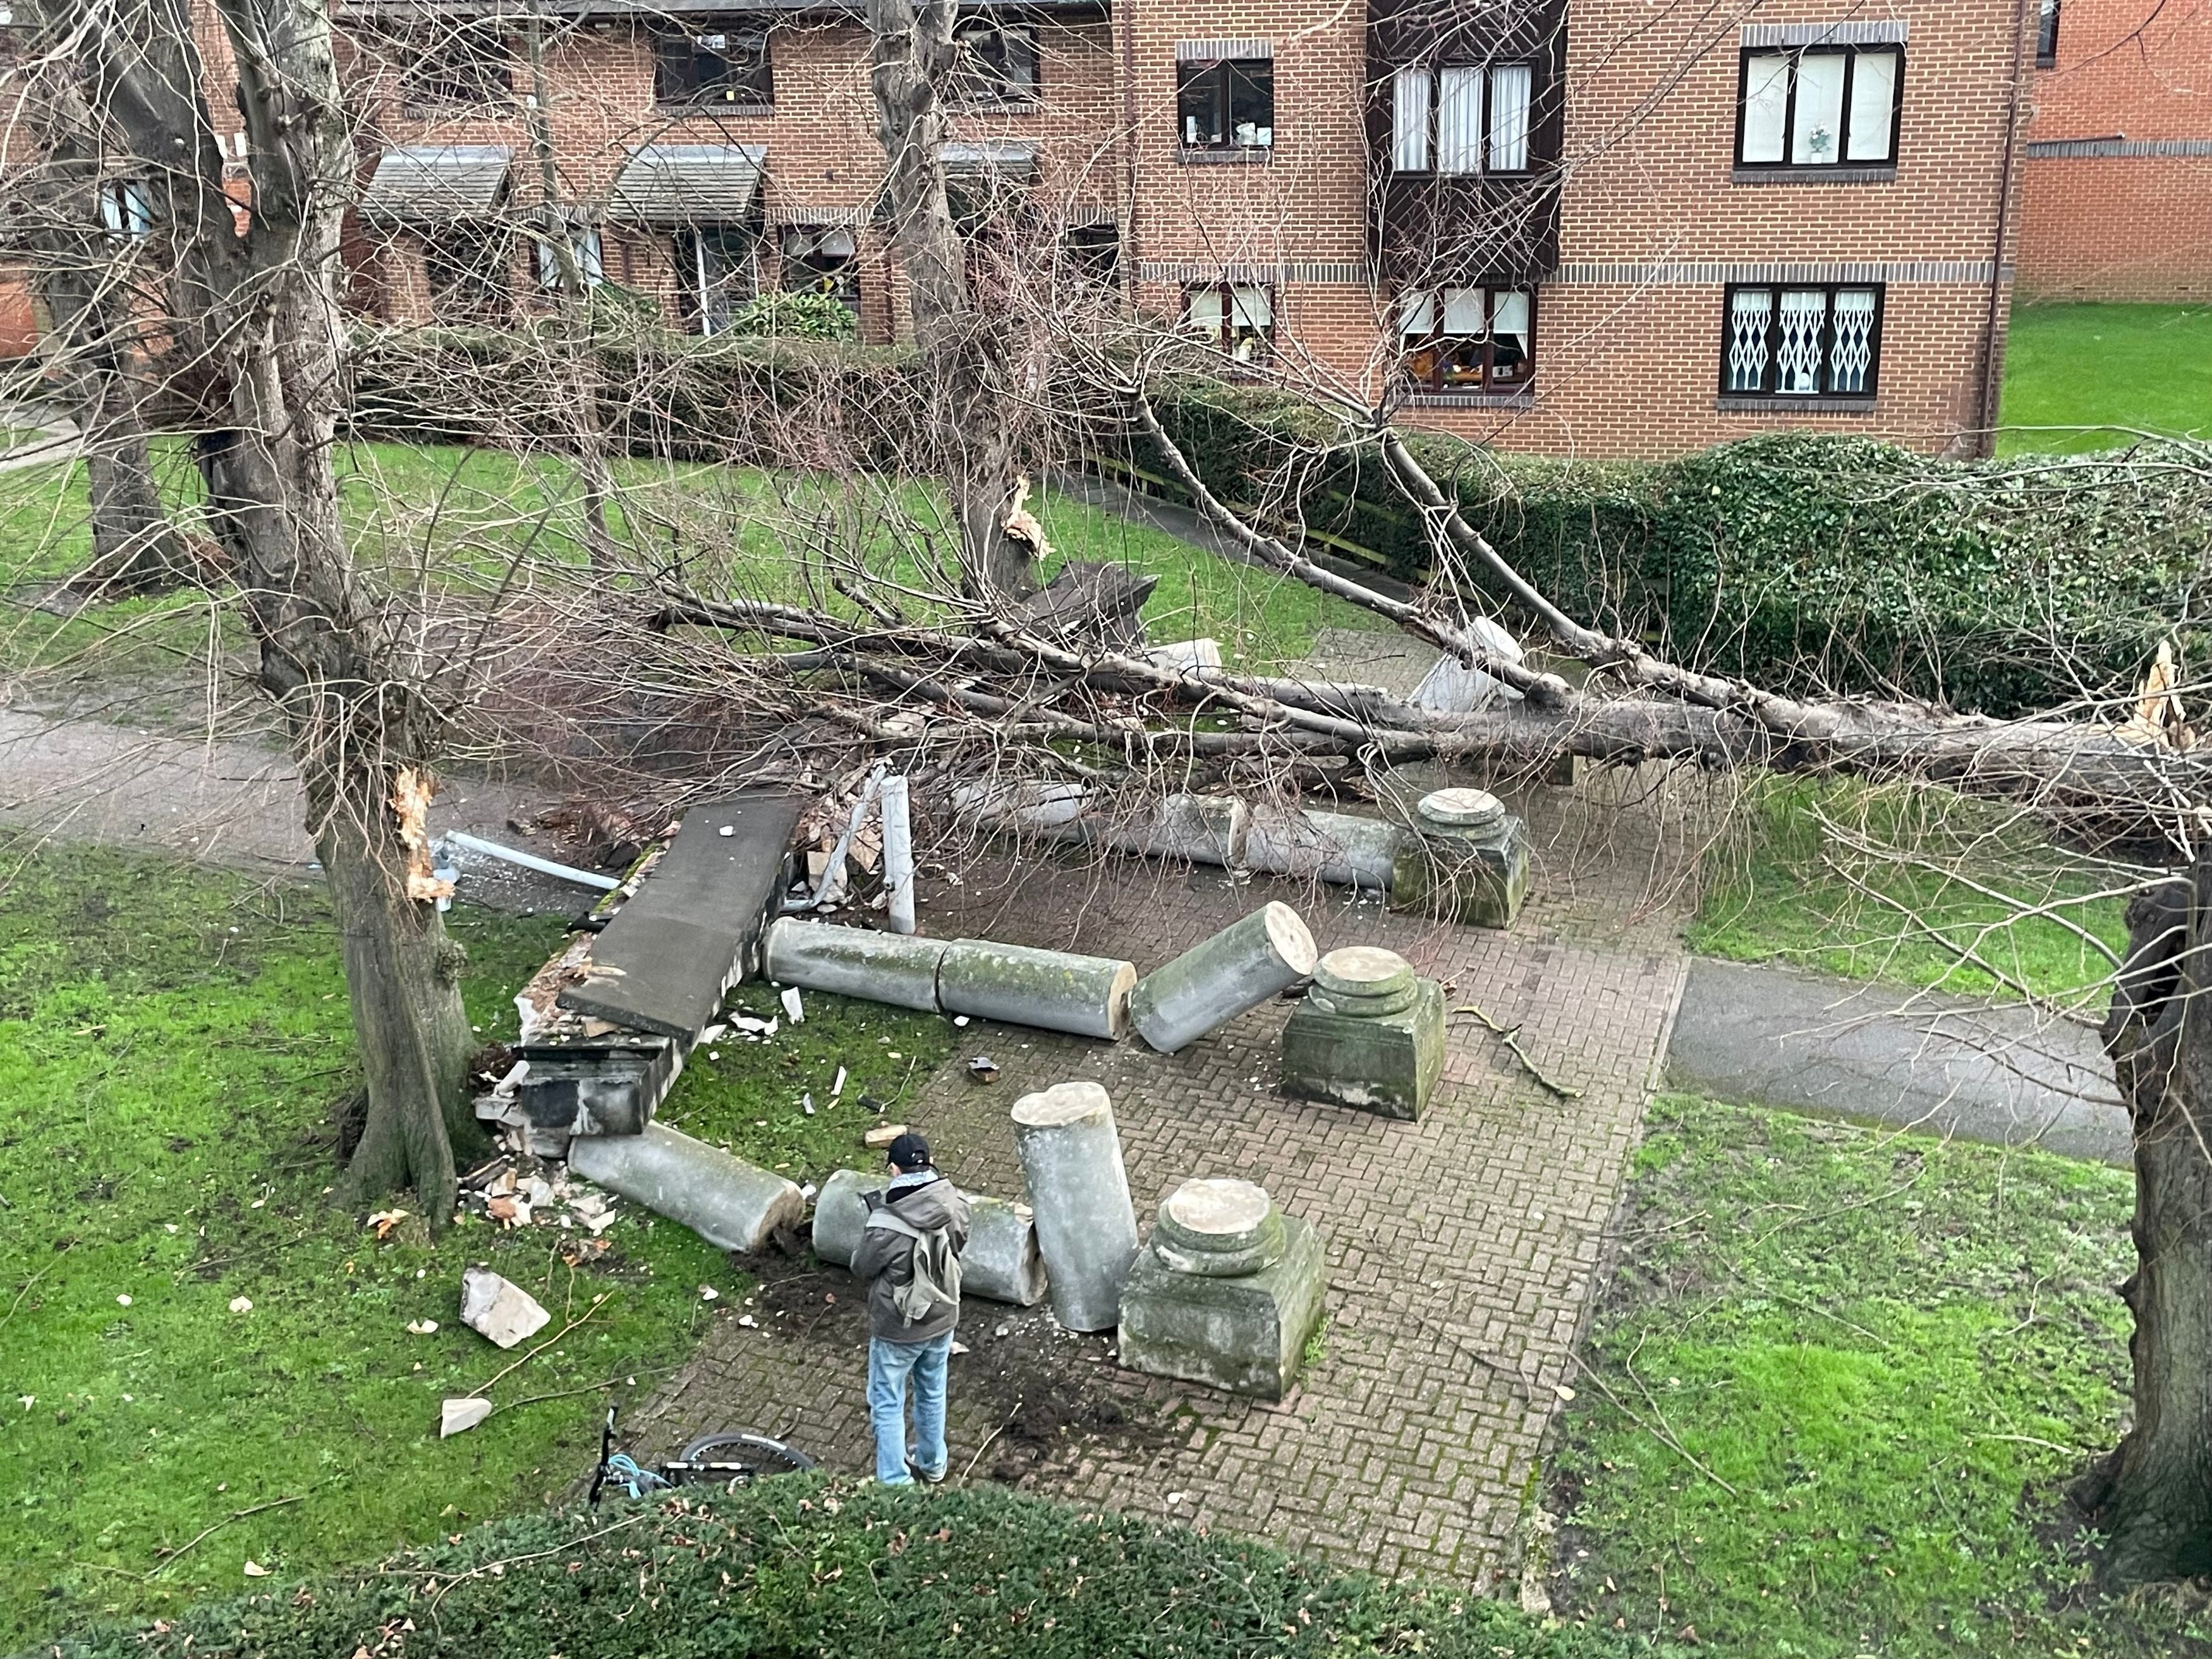 pA tree has been blown over by the wind and crashed into a portico, knocking it down in Tooting, south west London/p